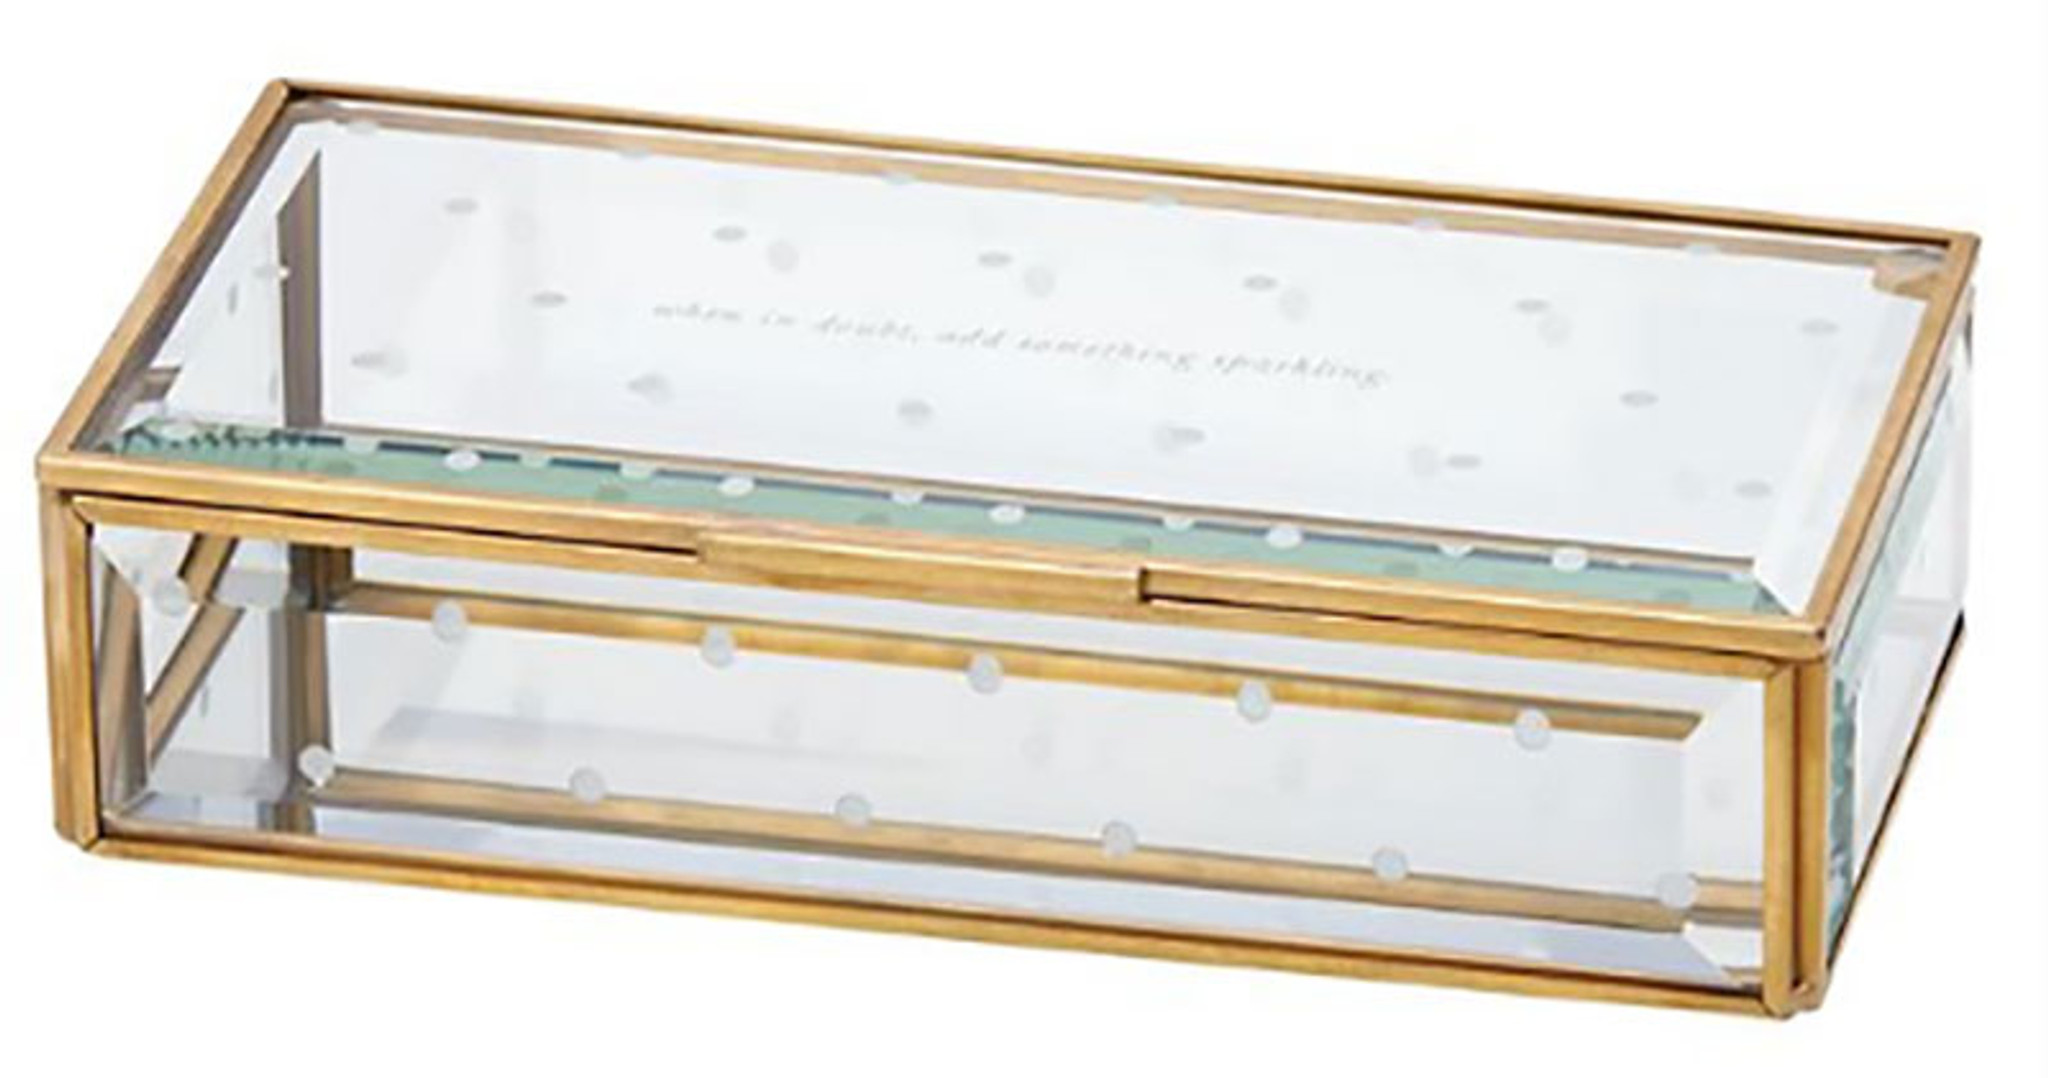 Kate Spade Out of Box Gls Jewelry Box Larabee 868857 - HomeBello